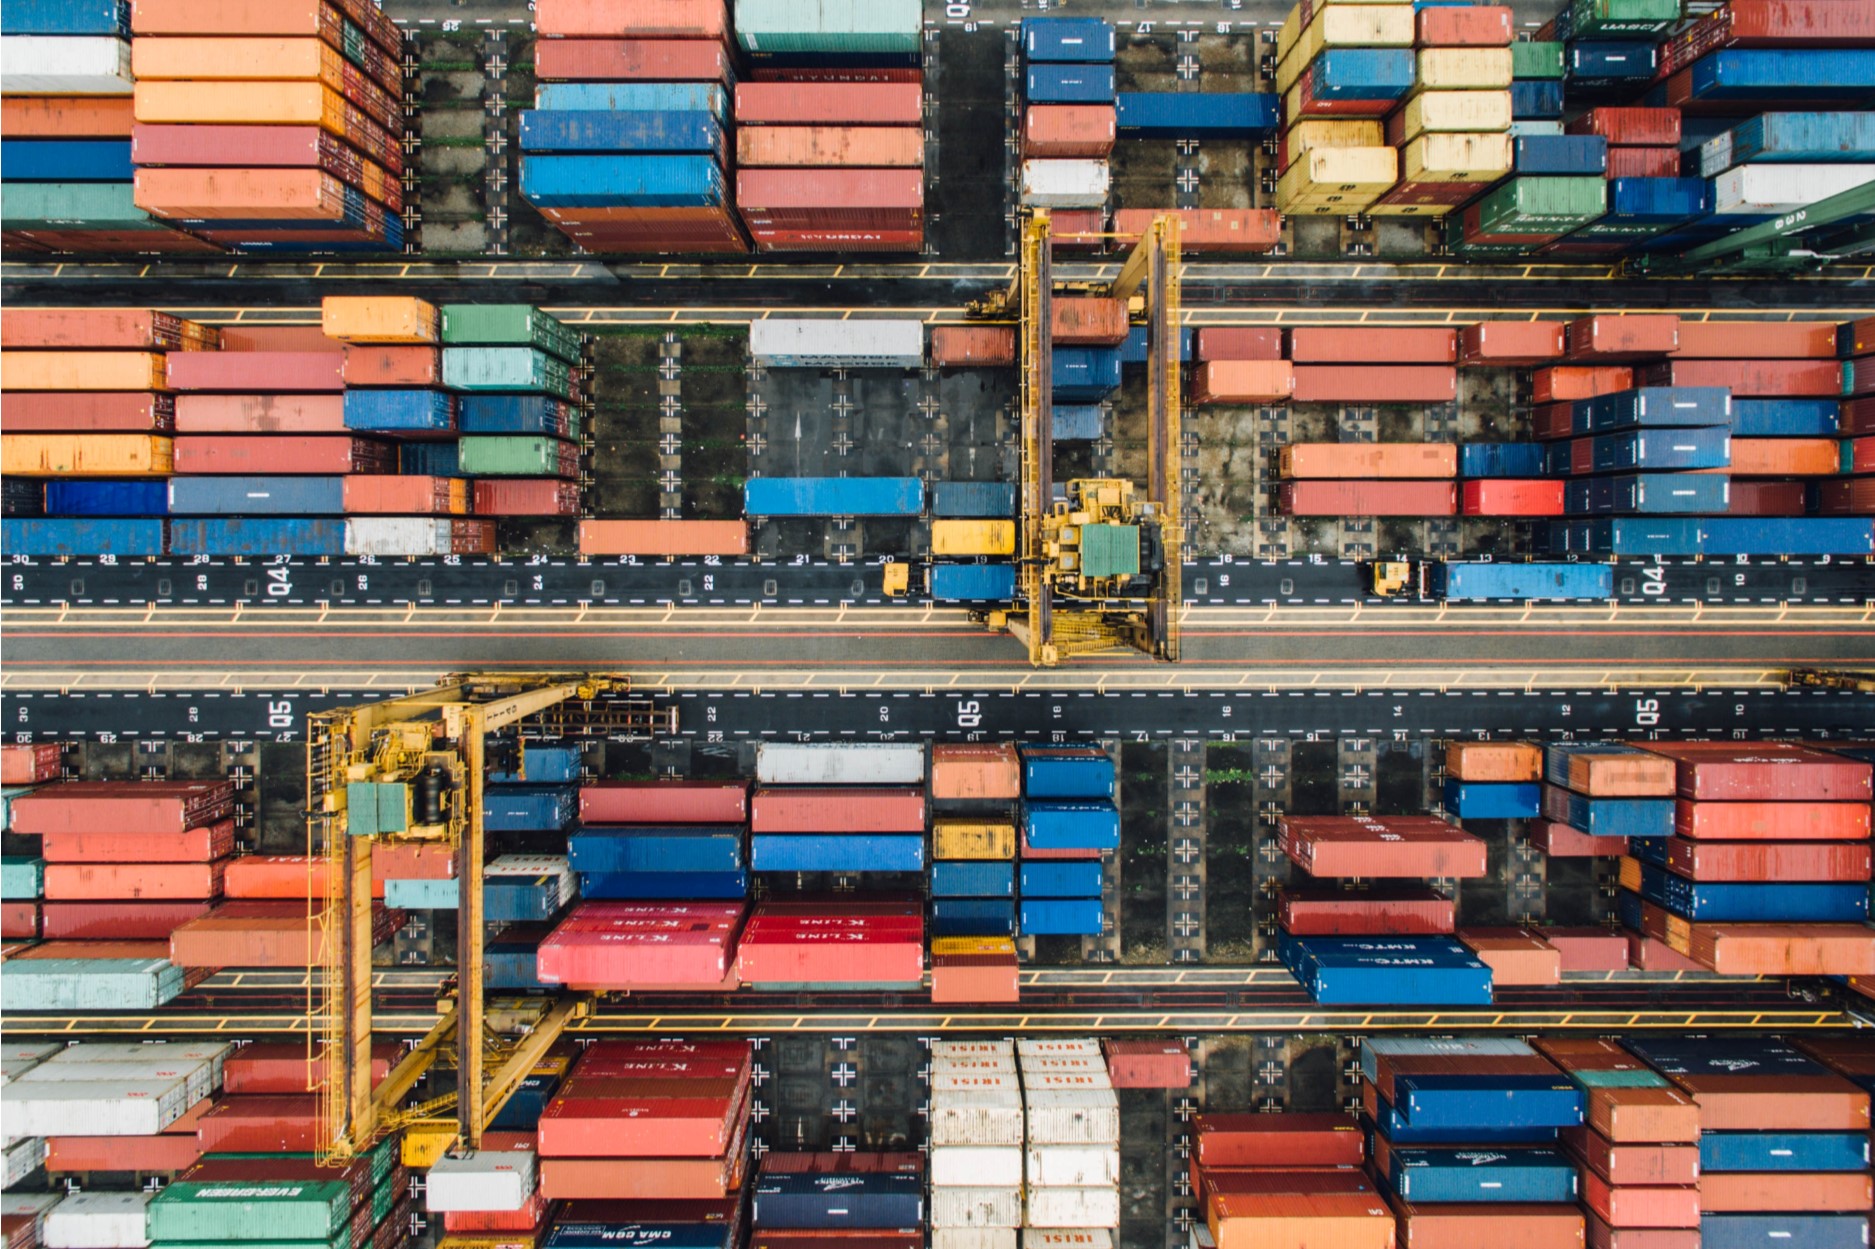 aerial view of containers in a shipping yard